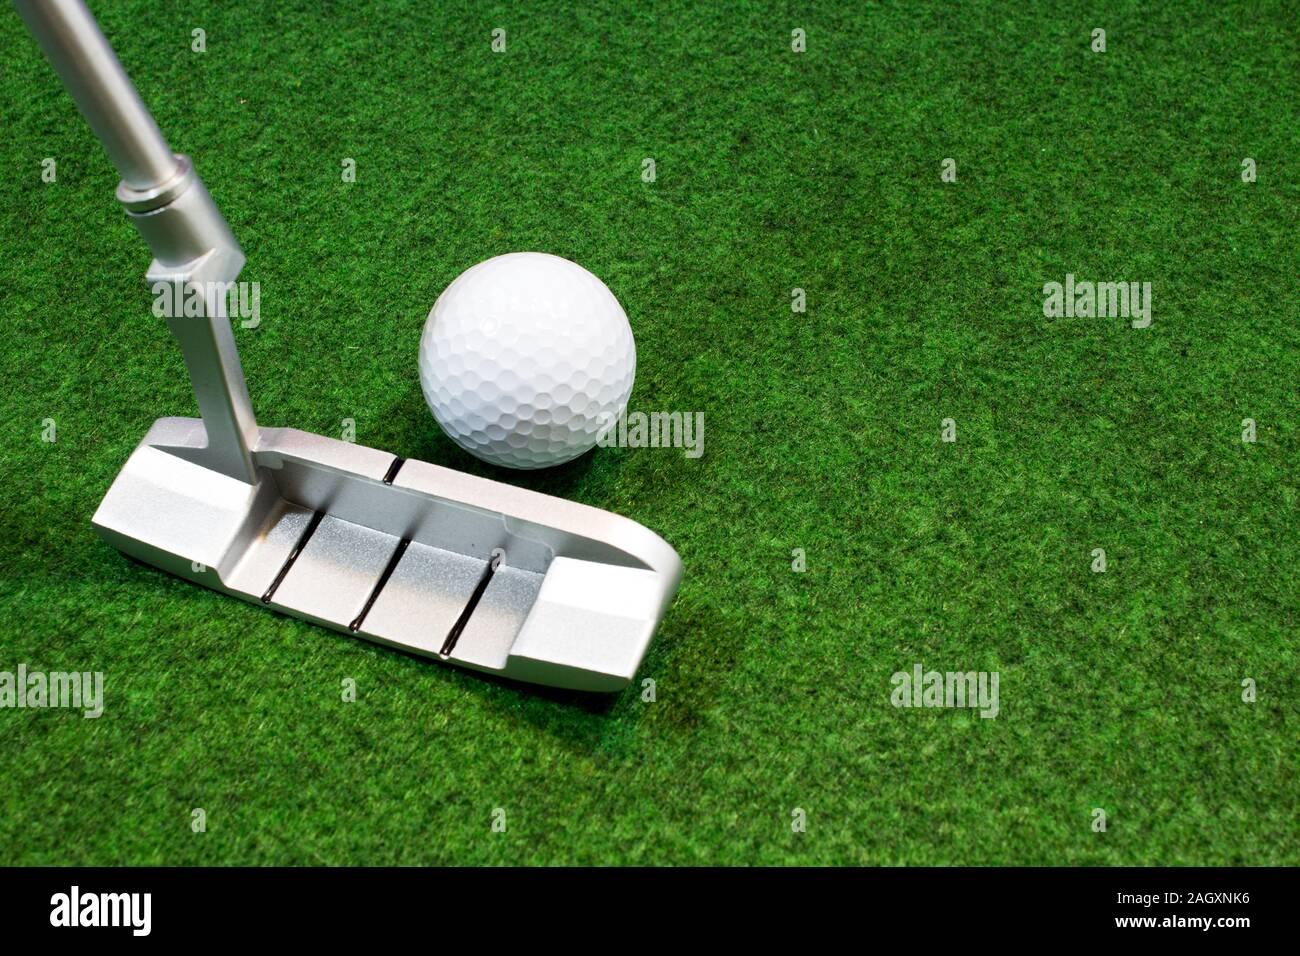 Putter, golf ball and green for the relaxed office life Stock Photo